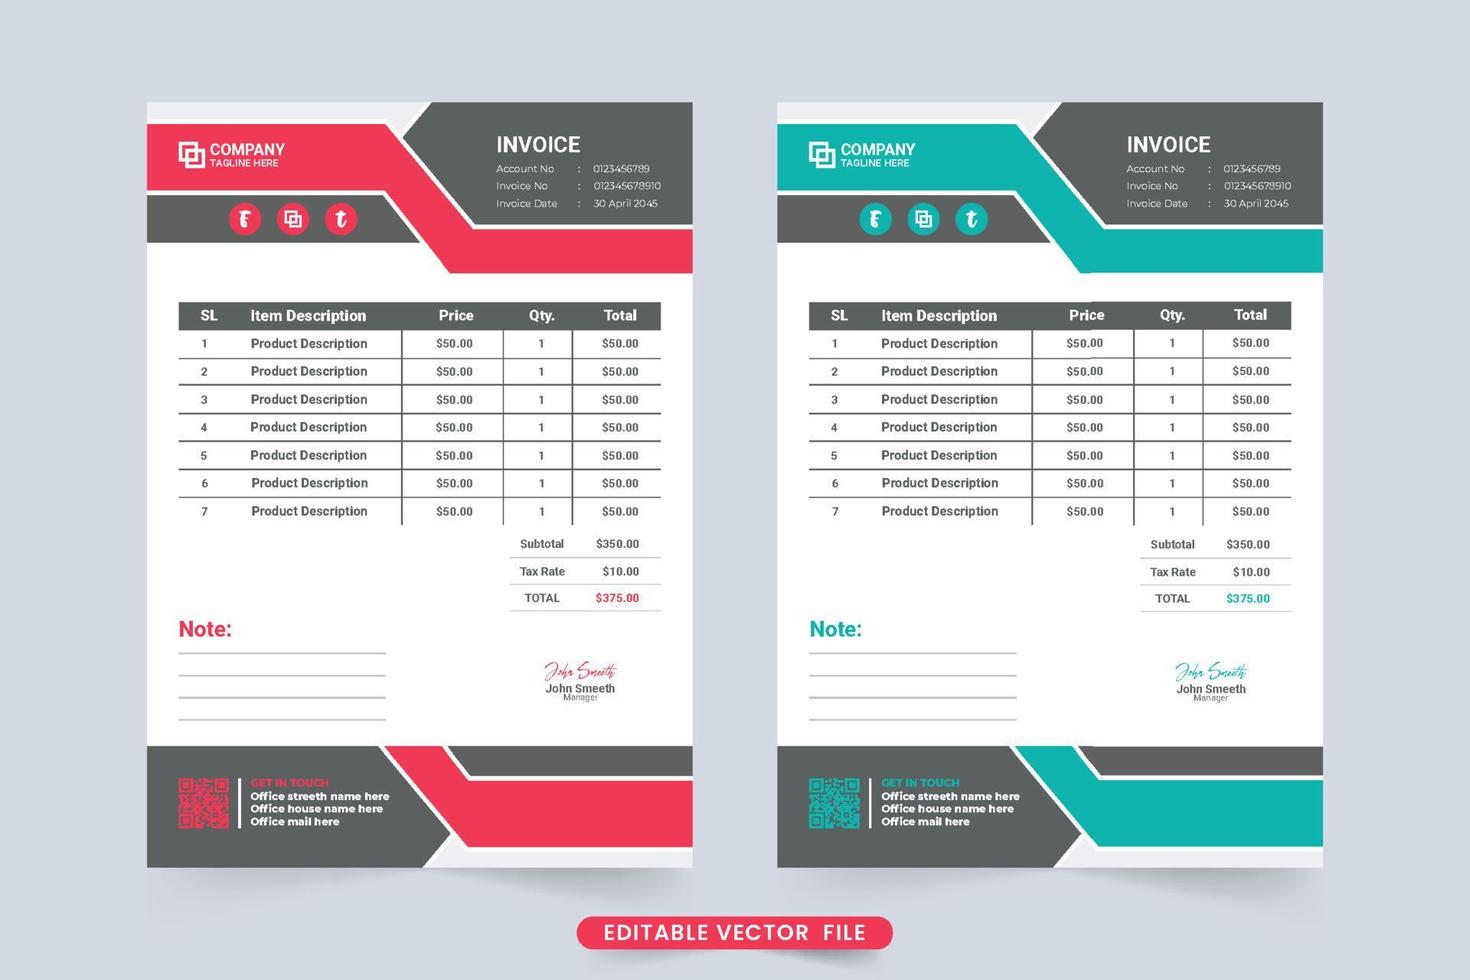 Company invoice and payment agreement paper design with red and blue colors. Product buy and sell receipt with cash invoice and price sections. Professional business invoice template vector. vector